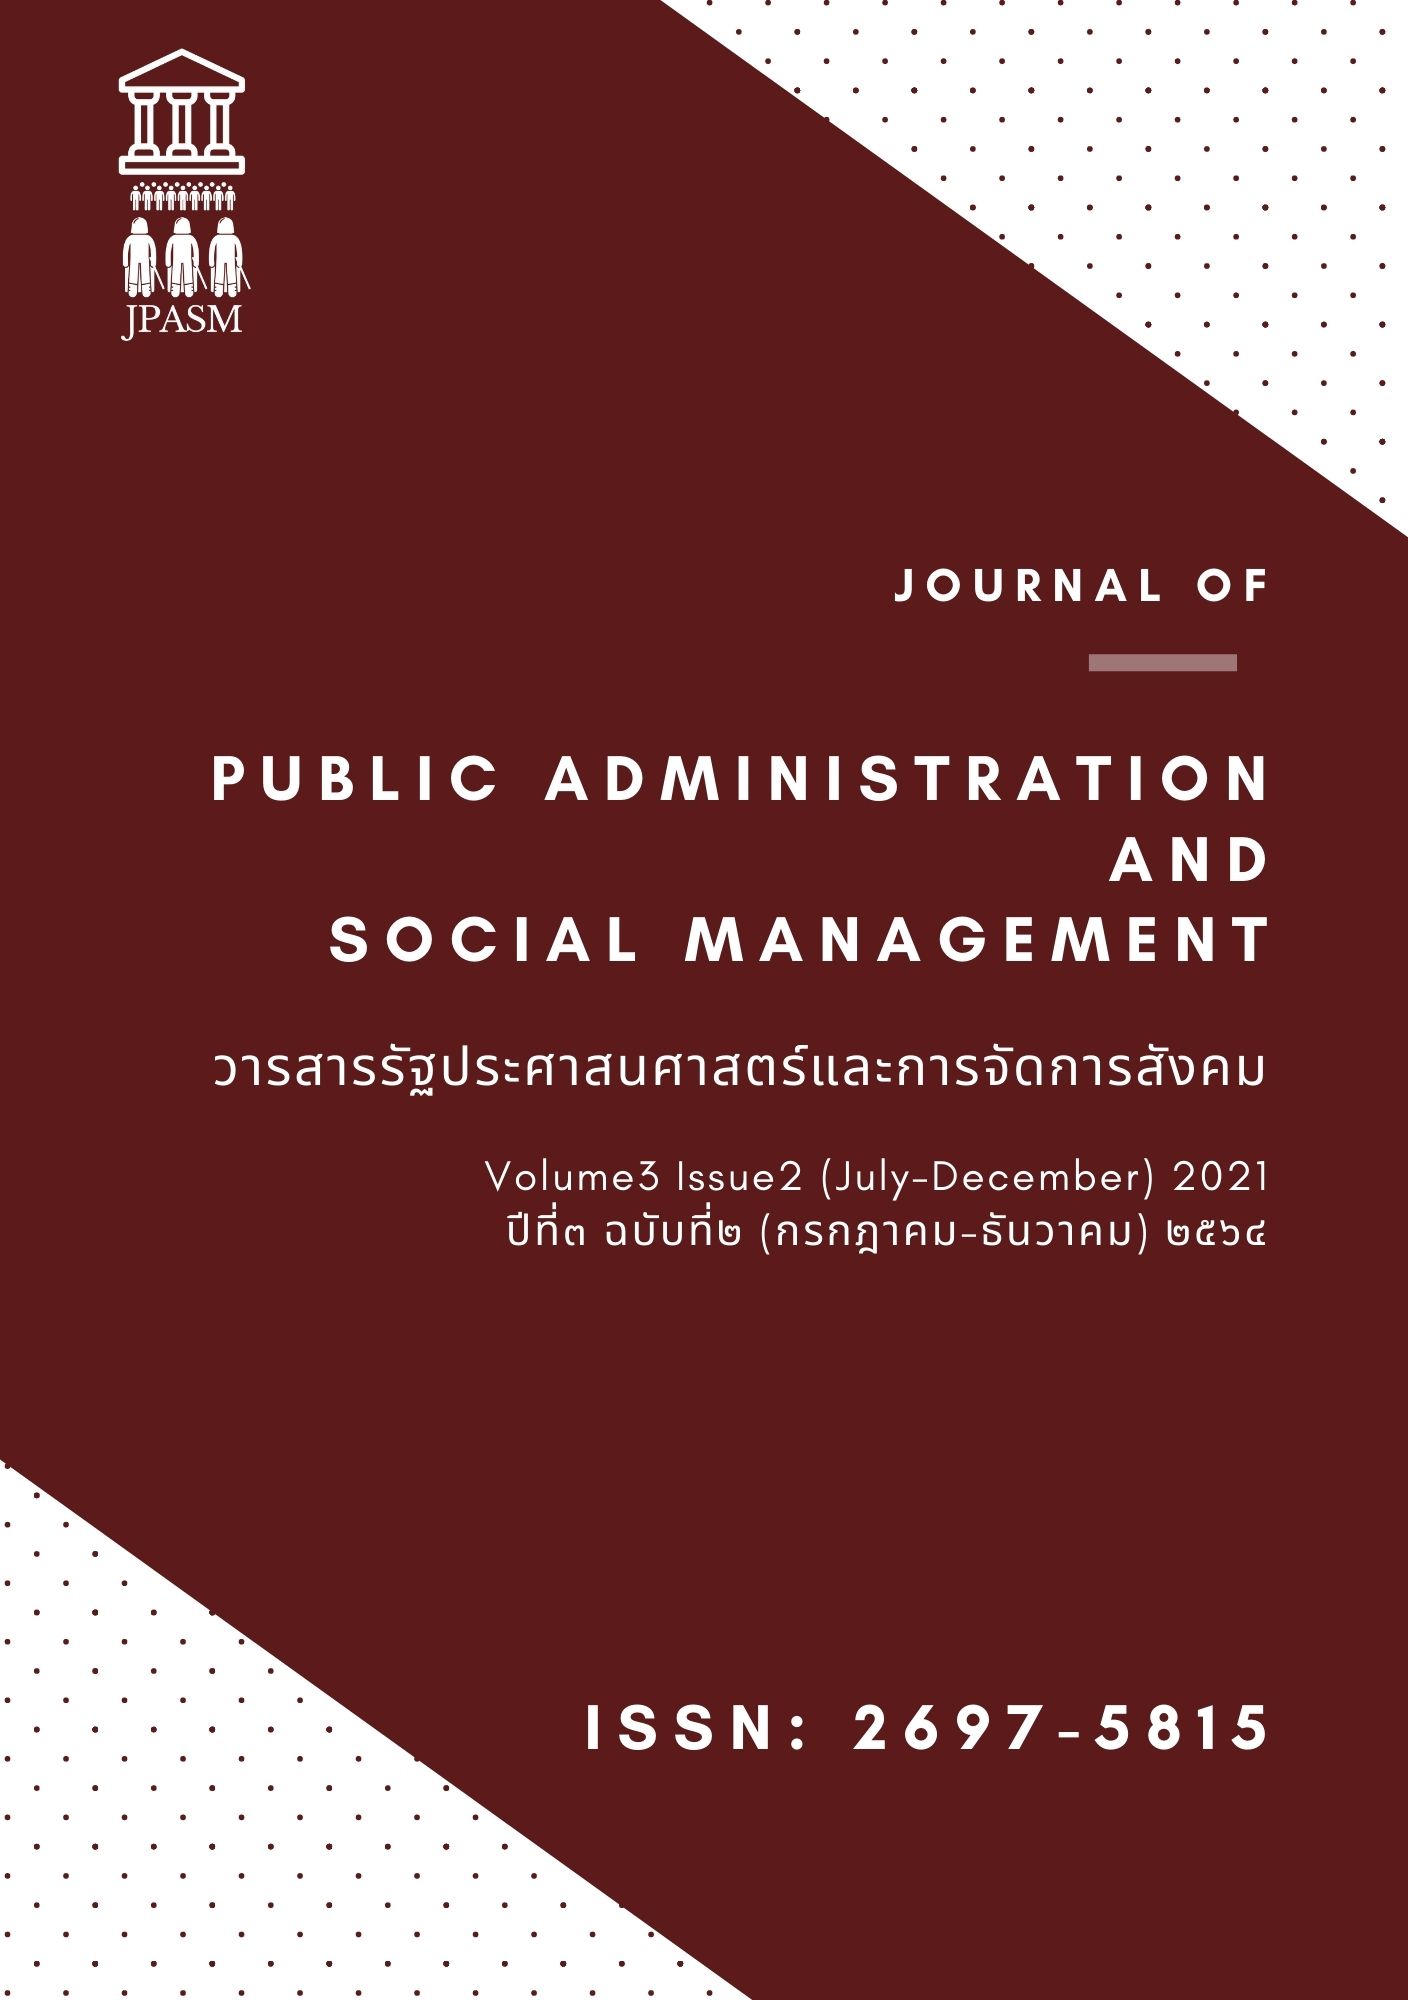 					View Vol. 3 No. 2 (2021): Journal of Public Administration and Social Management
				